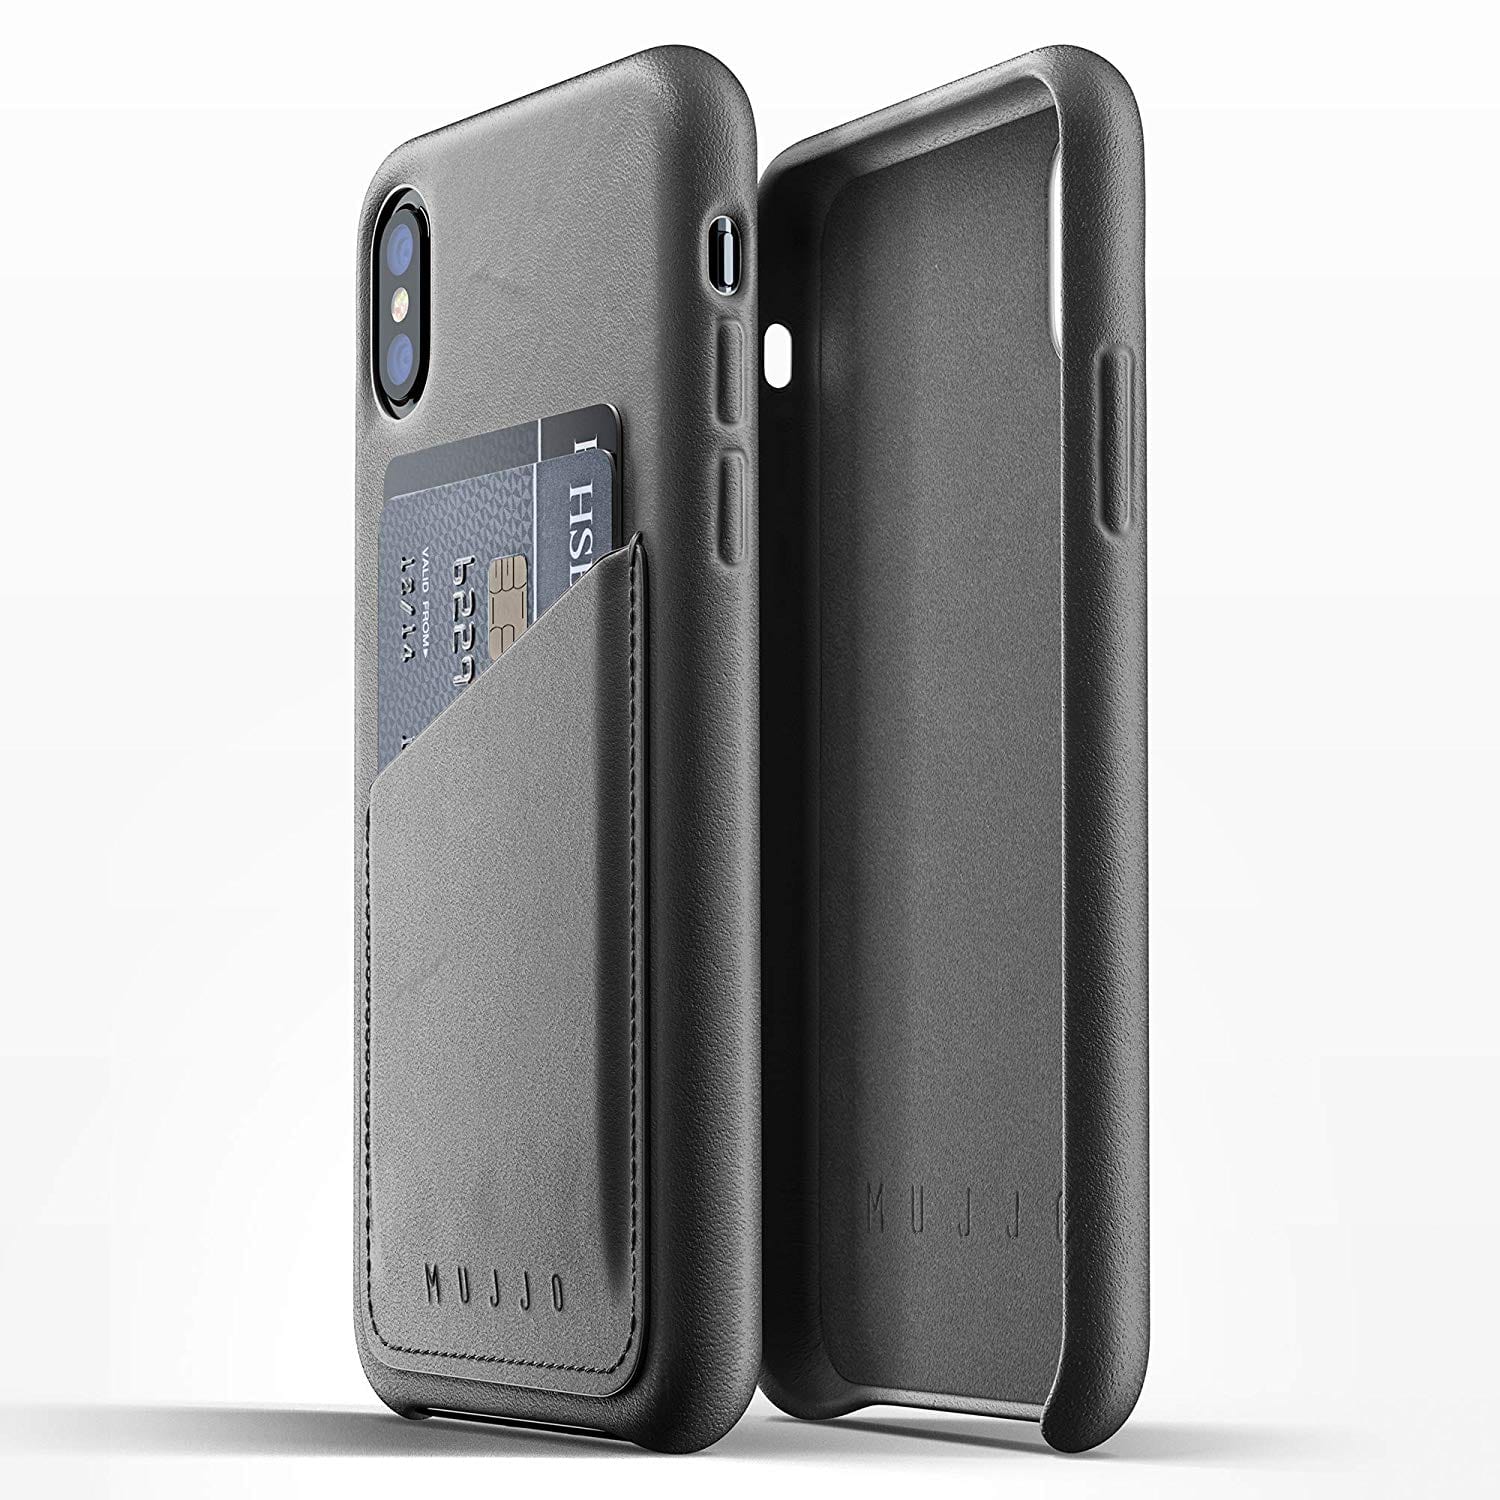 Mujjo Full Leather Wallet case for Apple iPhone Xs, iPhone X - Gray